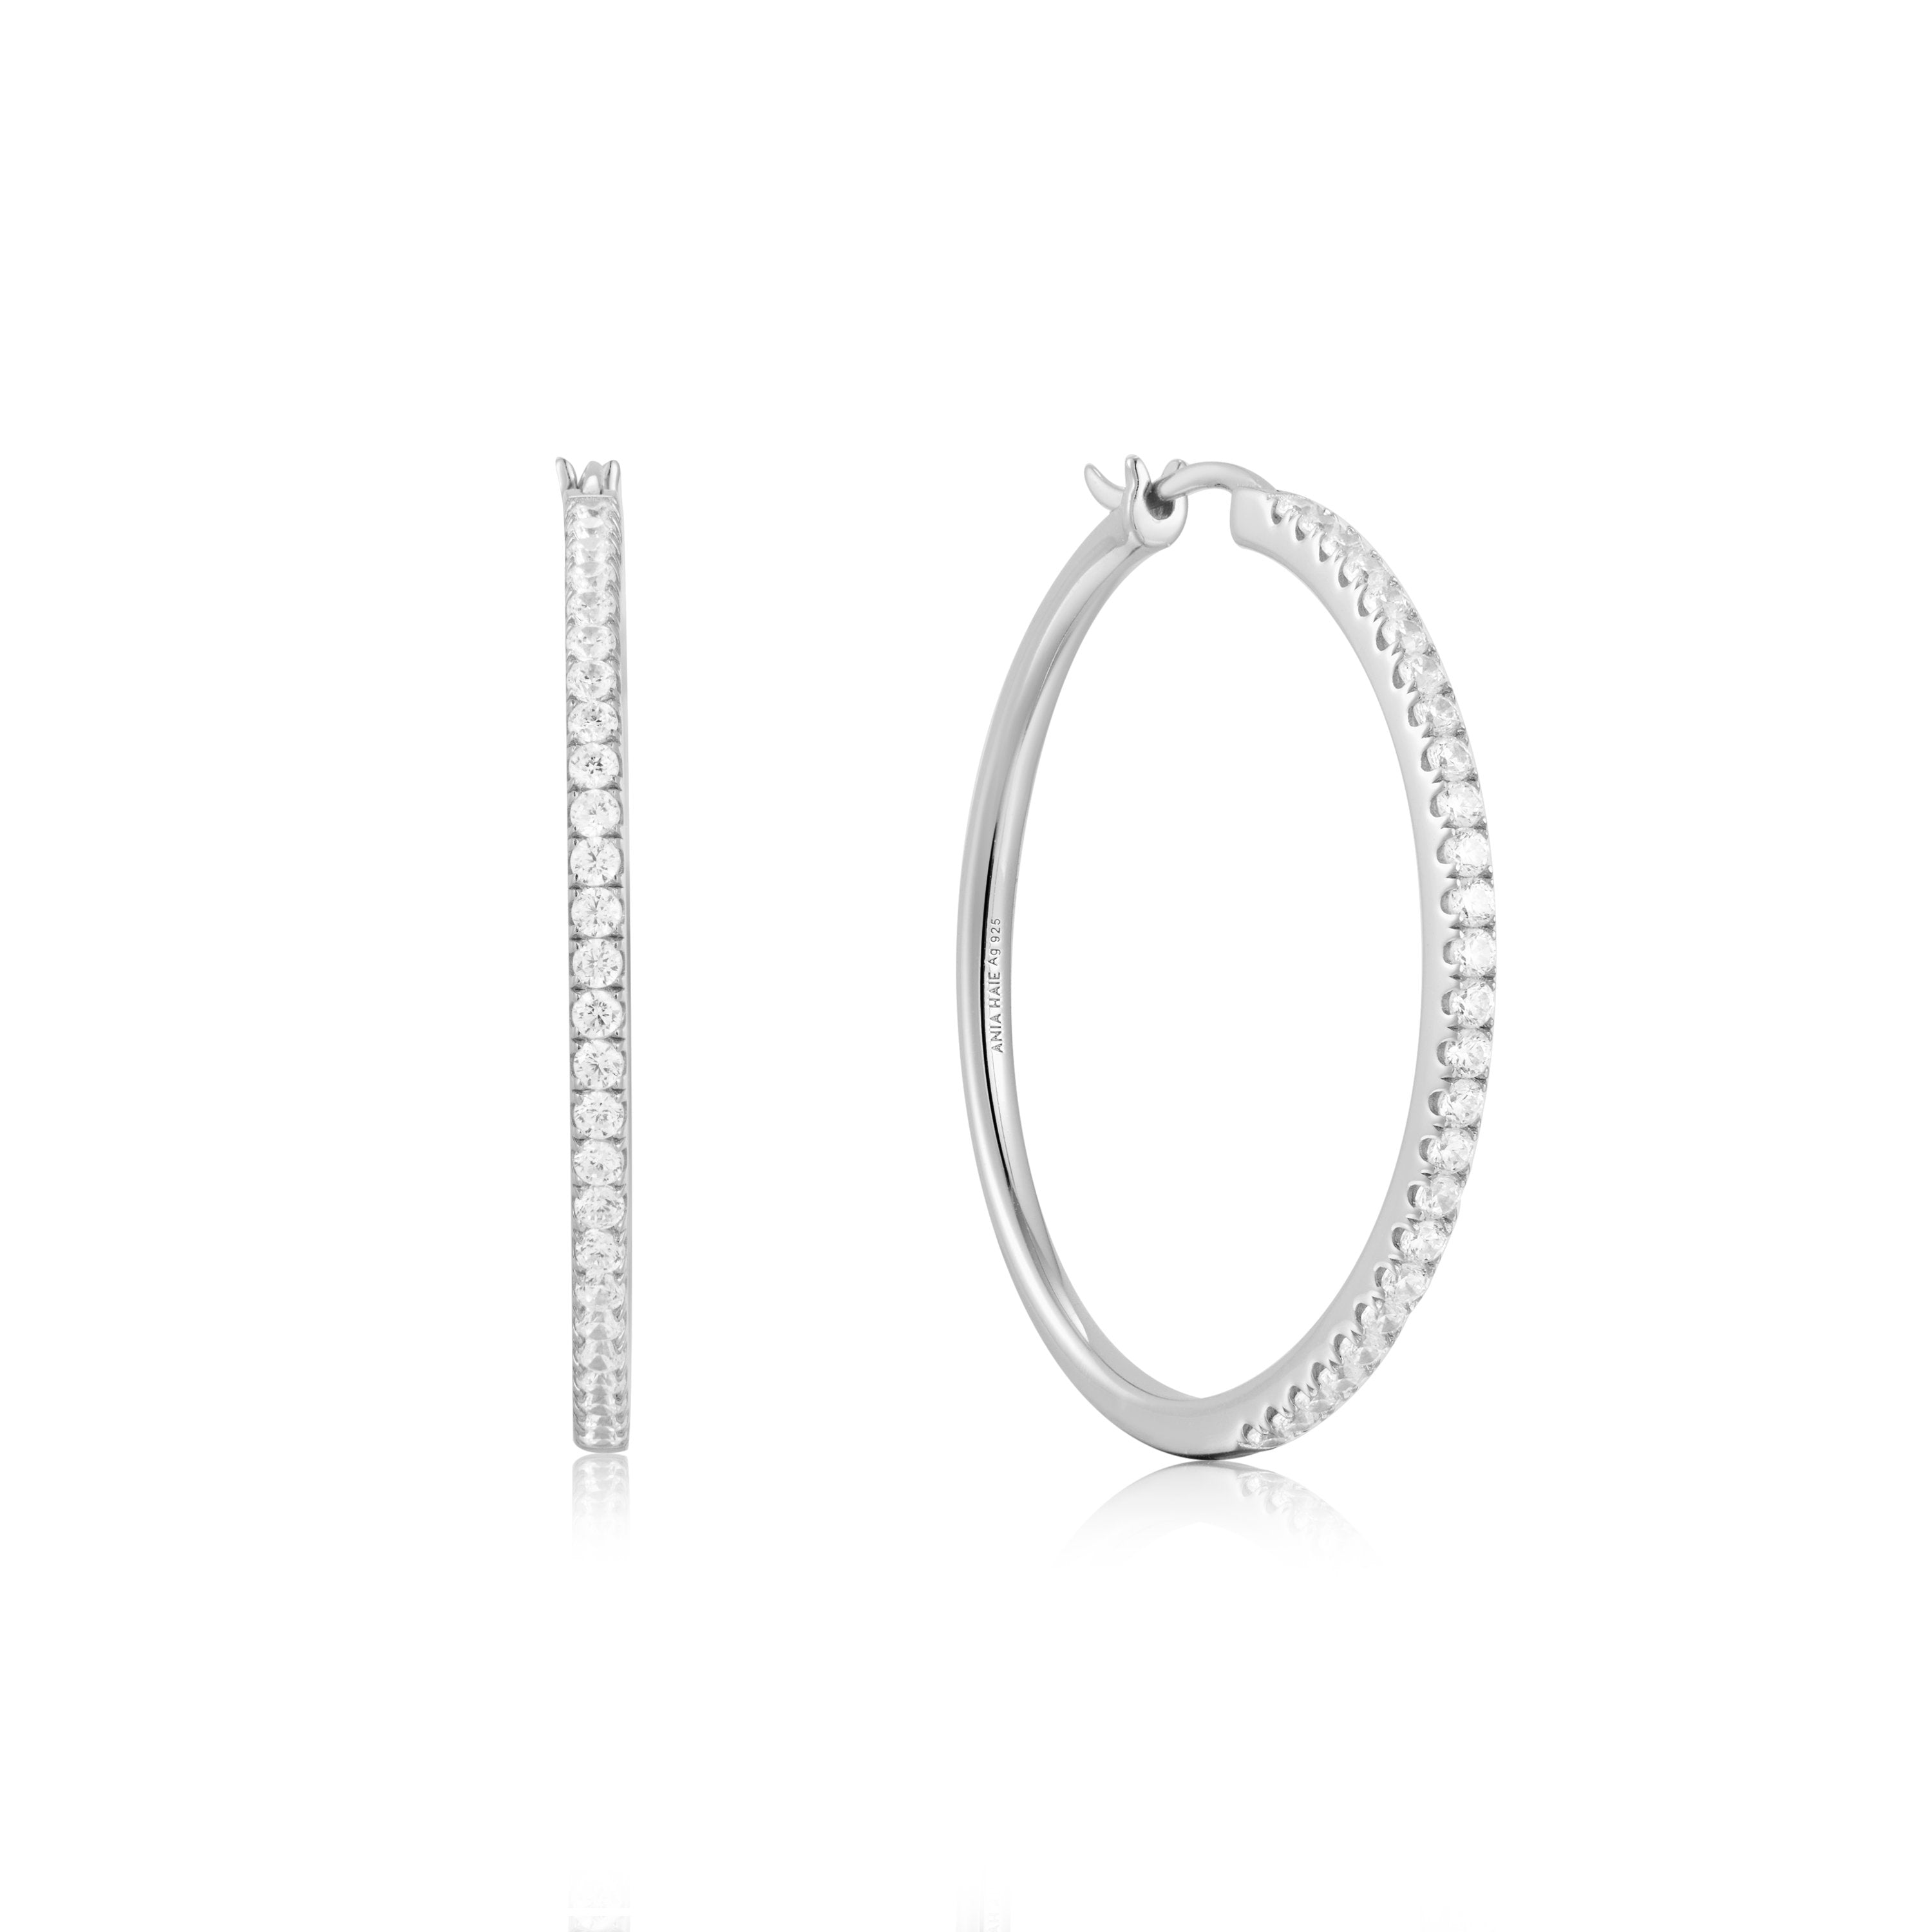 SS PAVE HOOP